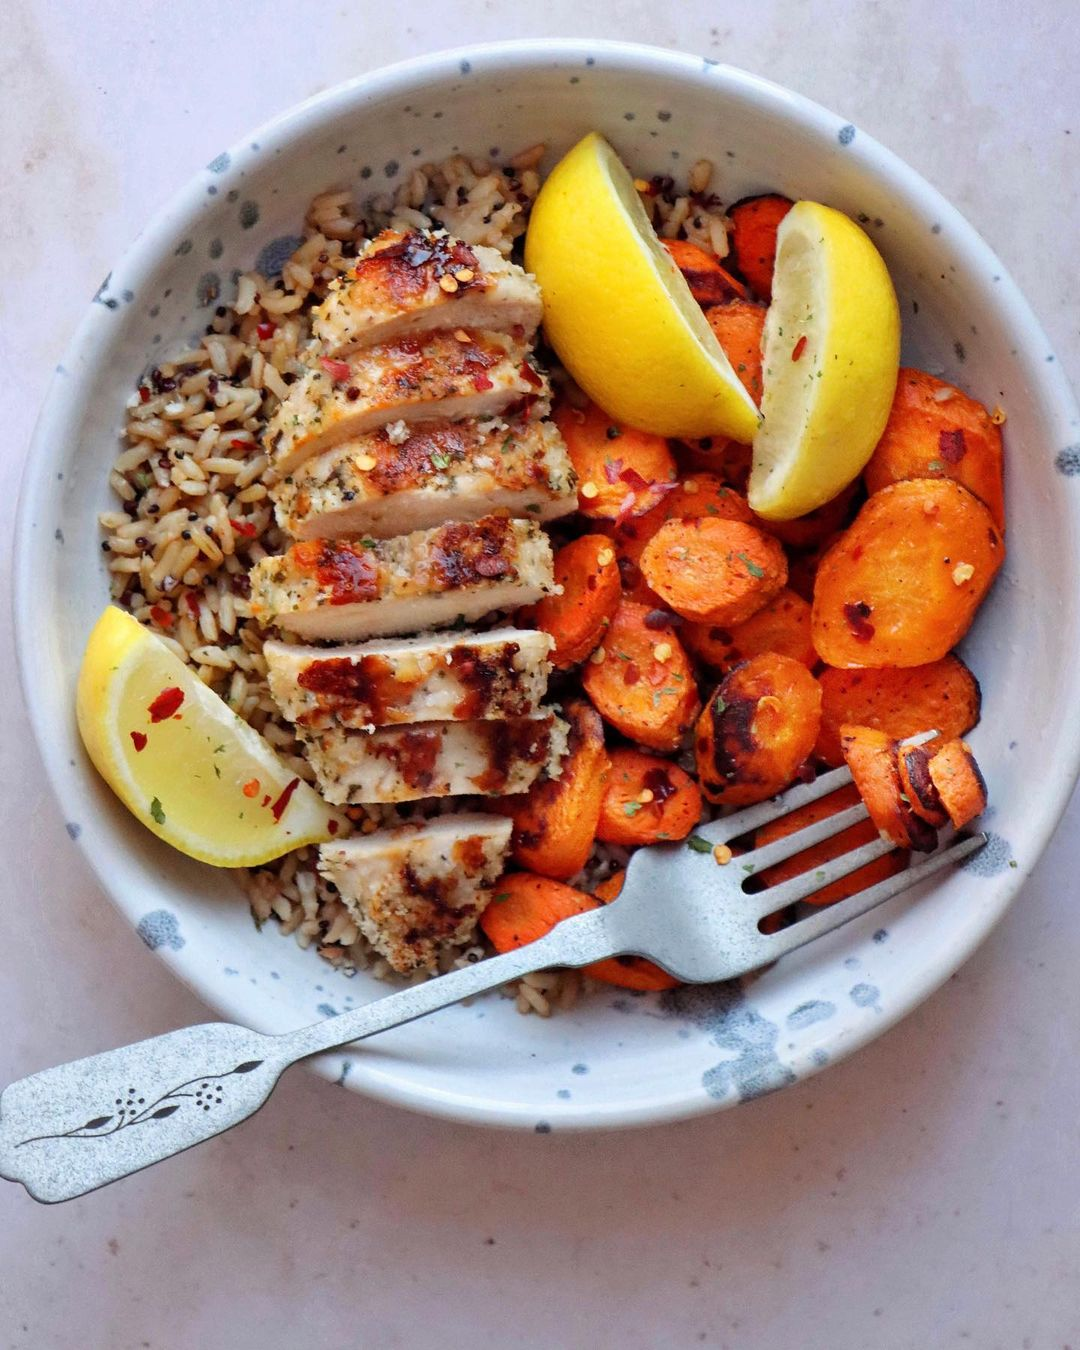 Grilled chicken, carrots, and lemon wedges on a bed of Proper Good's Brown Rice & Quinoa Blend